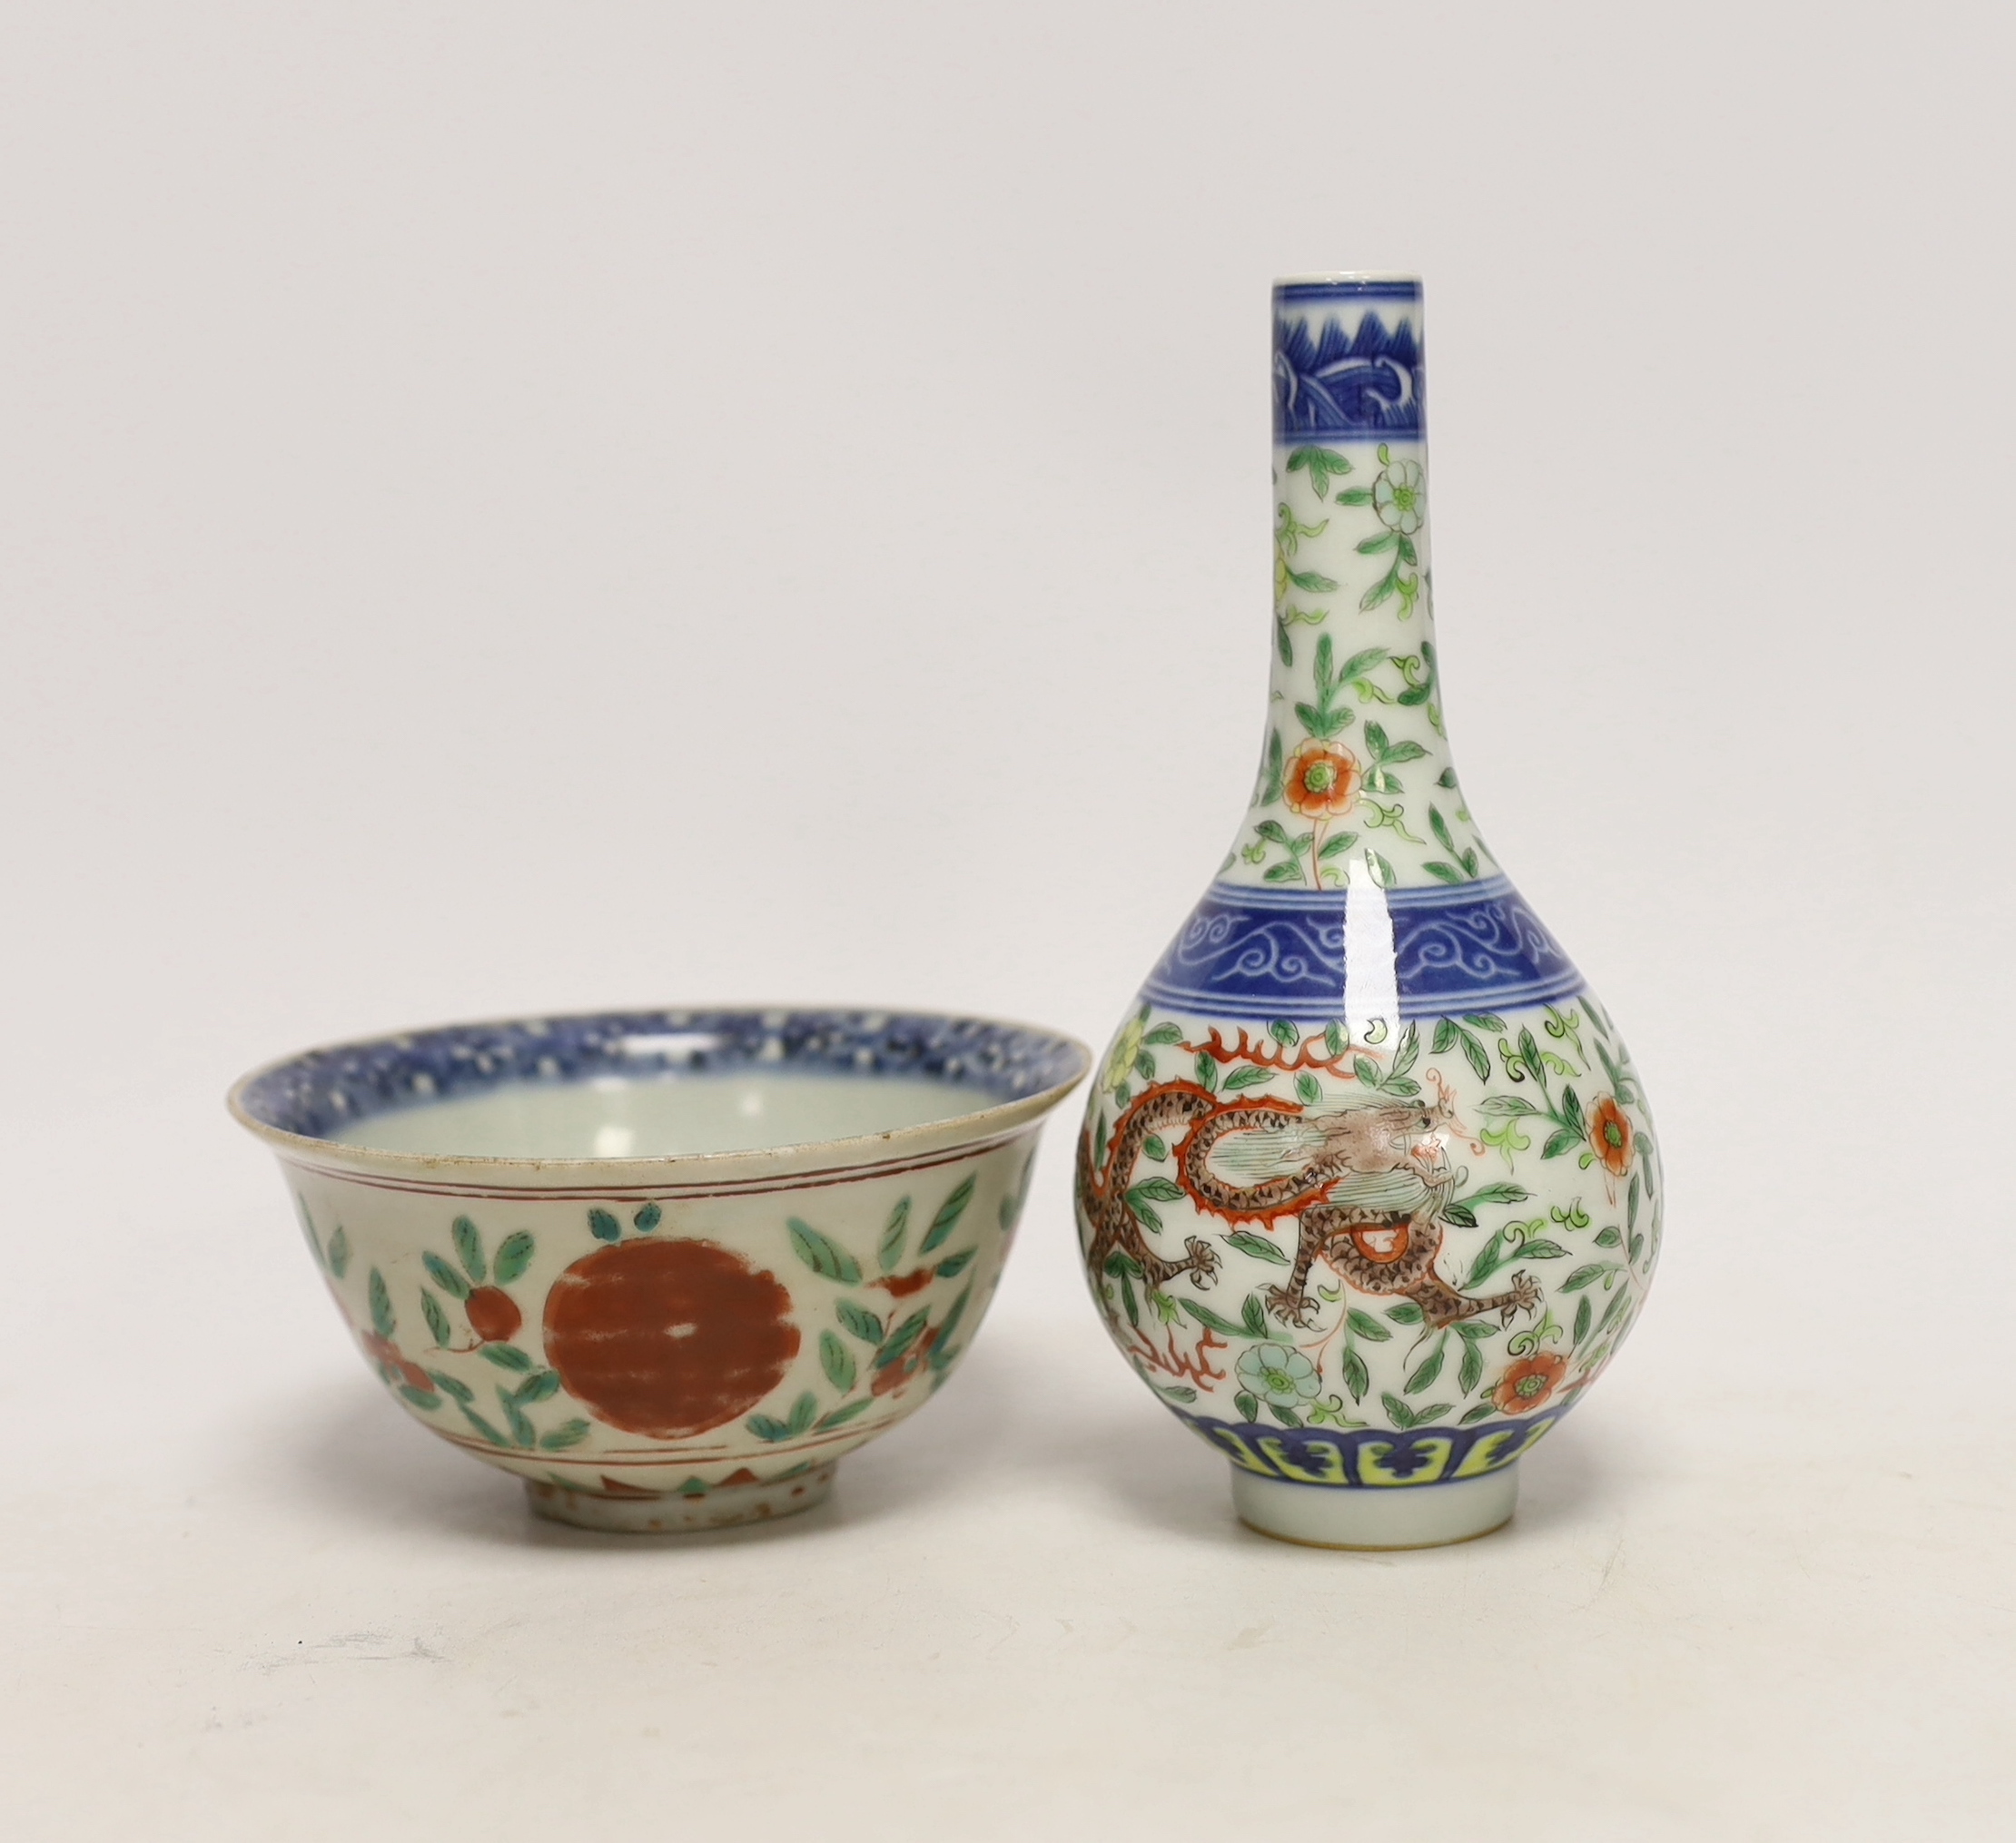 A Chinese bowl, possibly Ming, and Chinese bottle vase, 16.5cm high